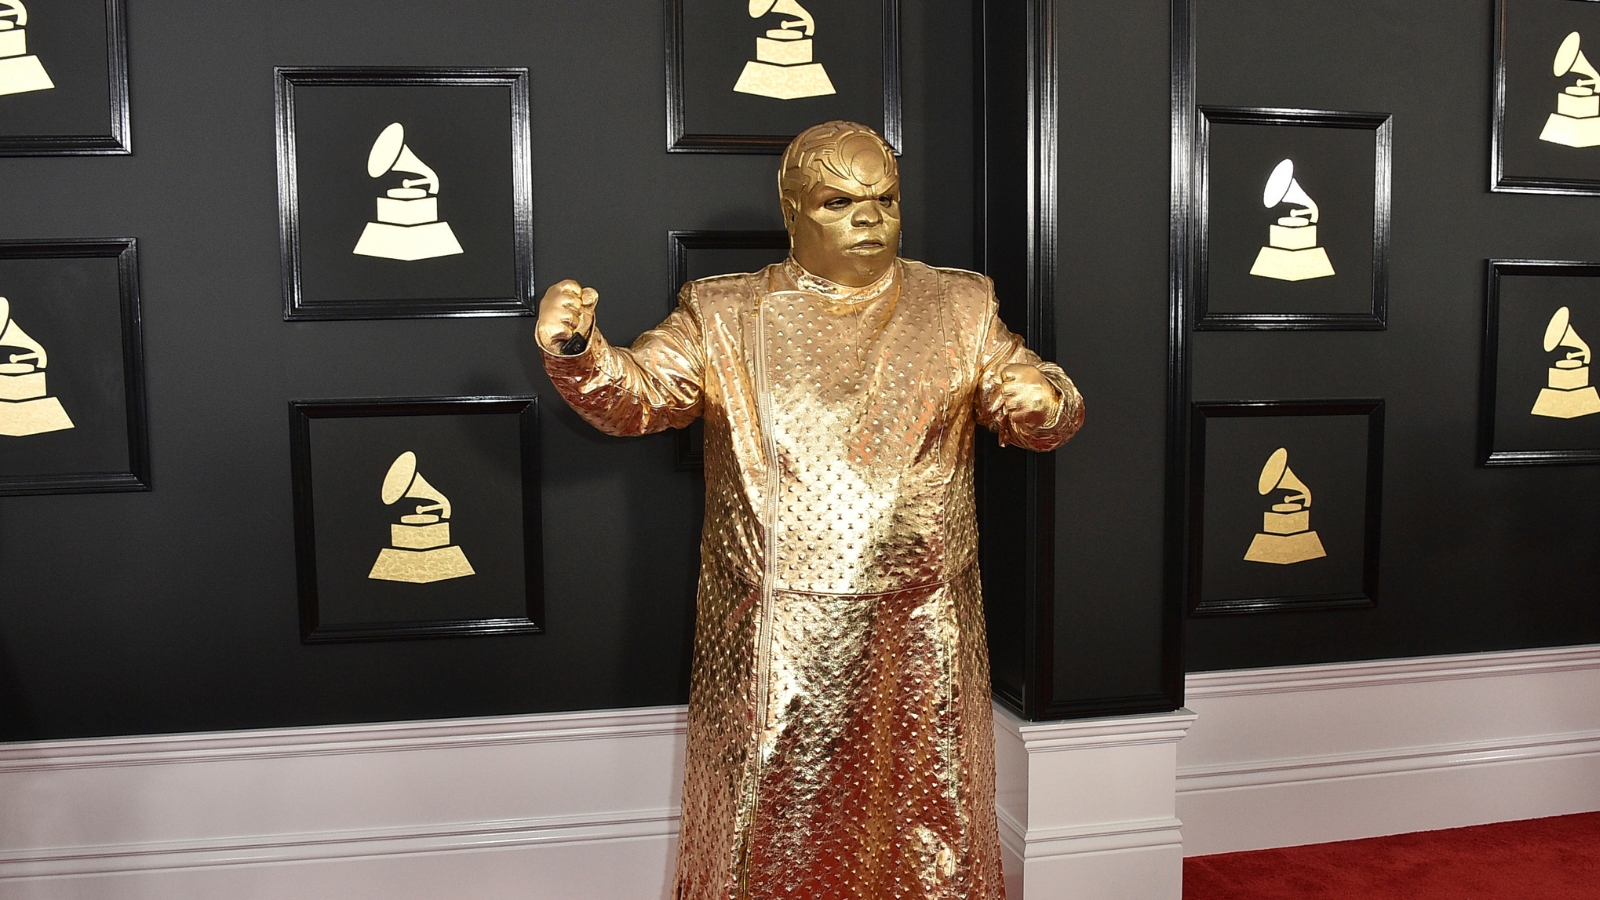 CeeLo Green's Gold Outfit at the 2017 Grammys